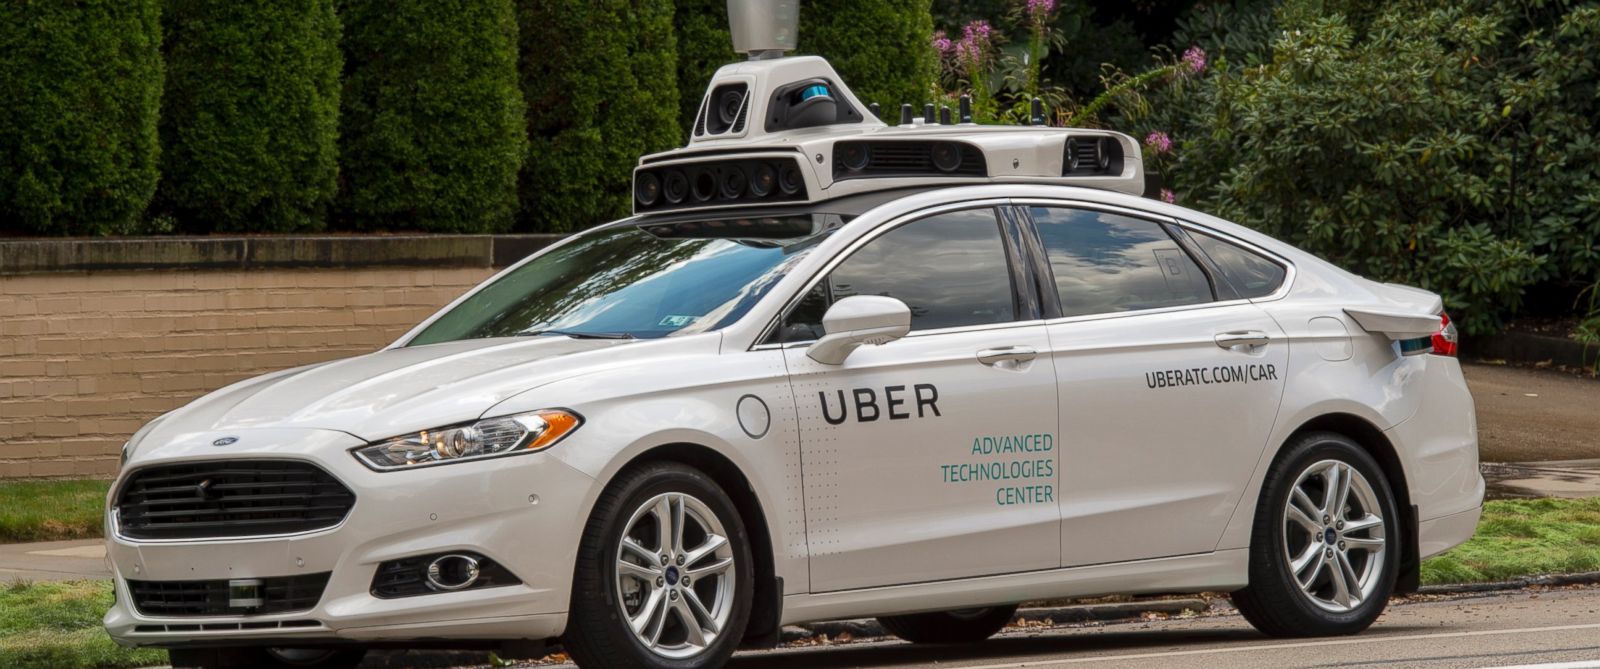 Uber Rolls Out Autonomous Car Technology in Pittsburgh ABC News